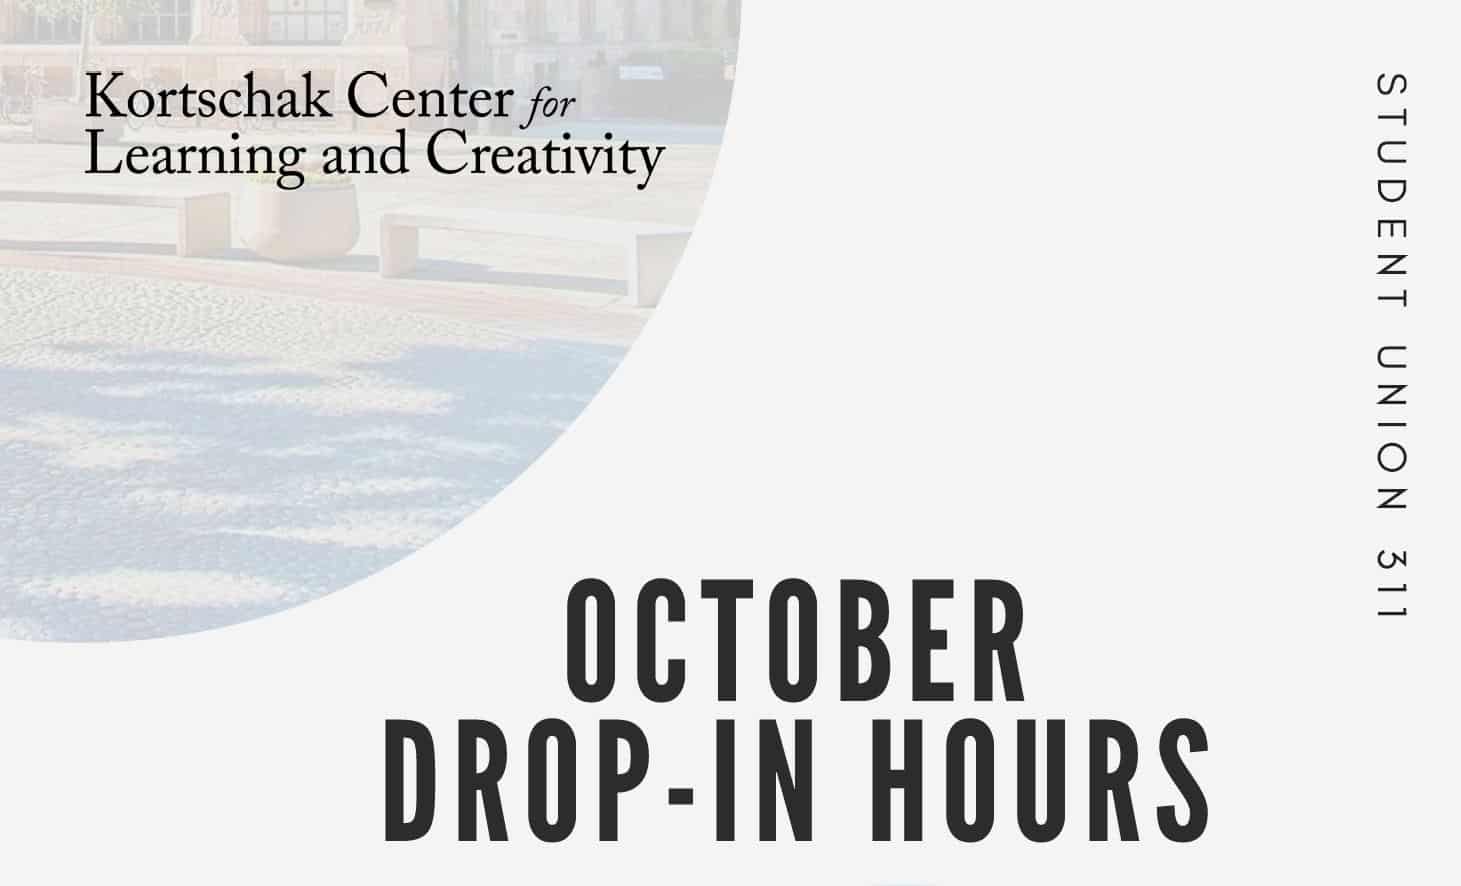 Featured image for “USC Kortschak Center for Learning and Creativity October Drop-In Hours”